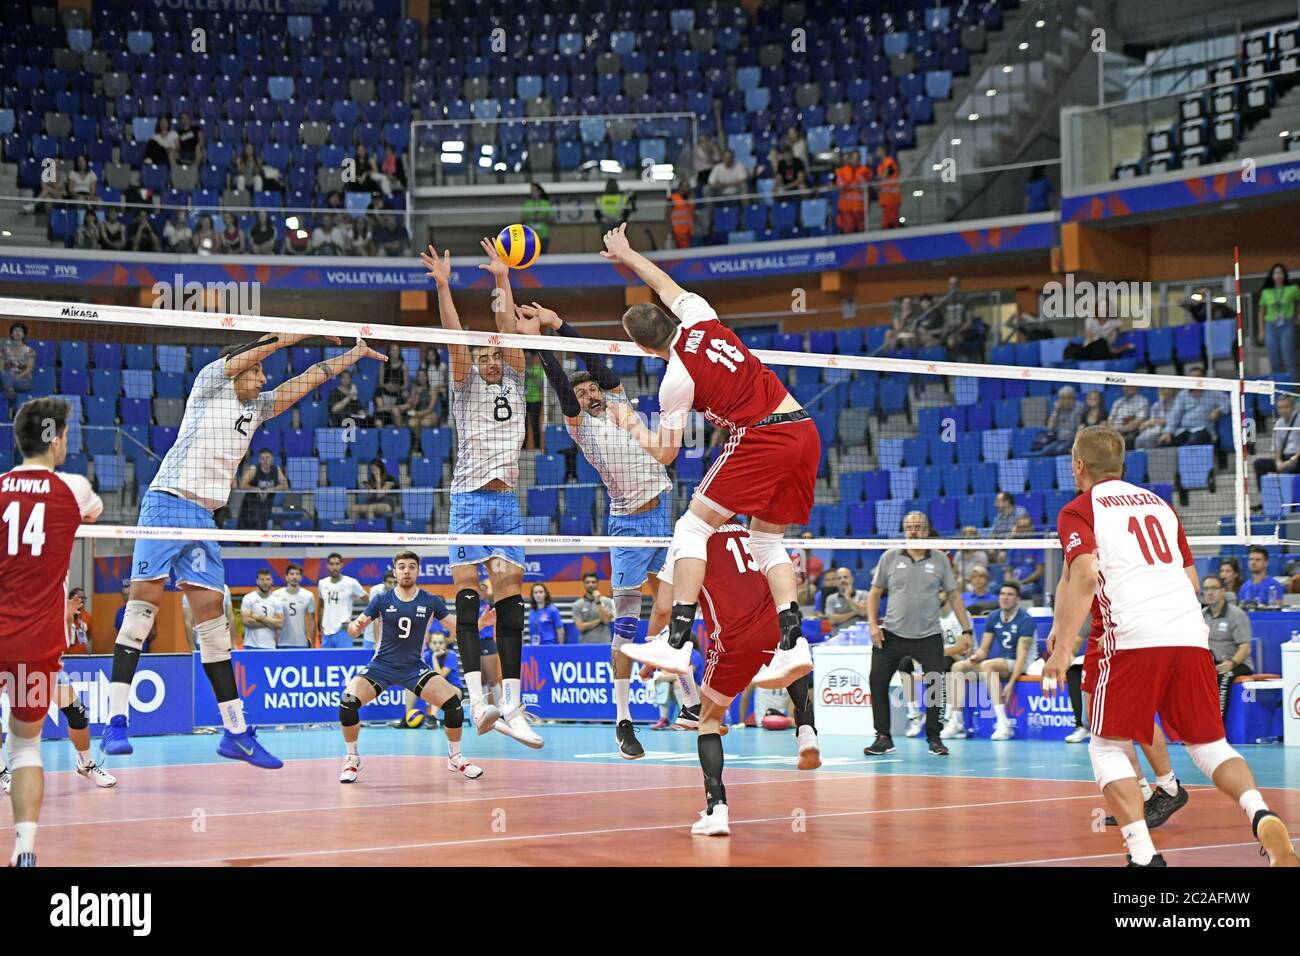 Indoor volleyball players in action, during the international Volleyball Nations League match, Poland vs Argentina, in Milan. Stock Photo